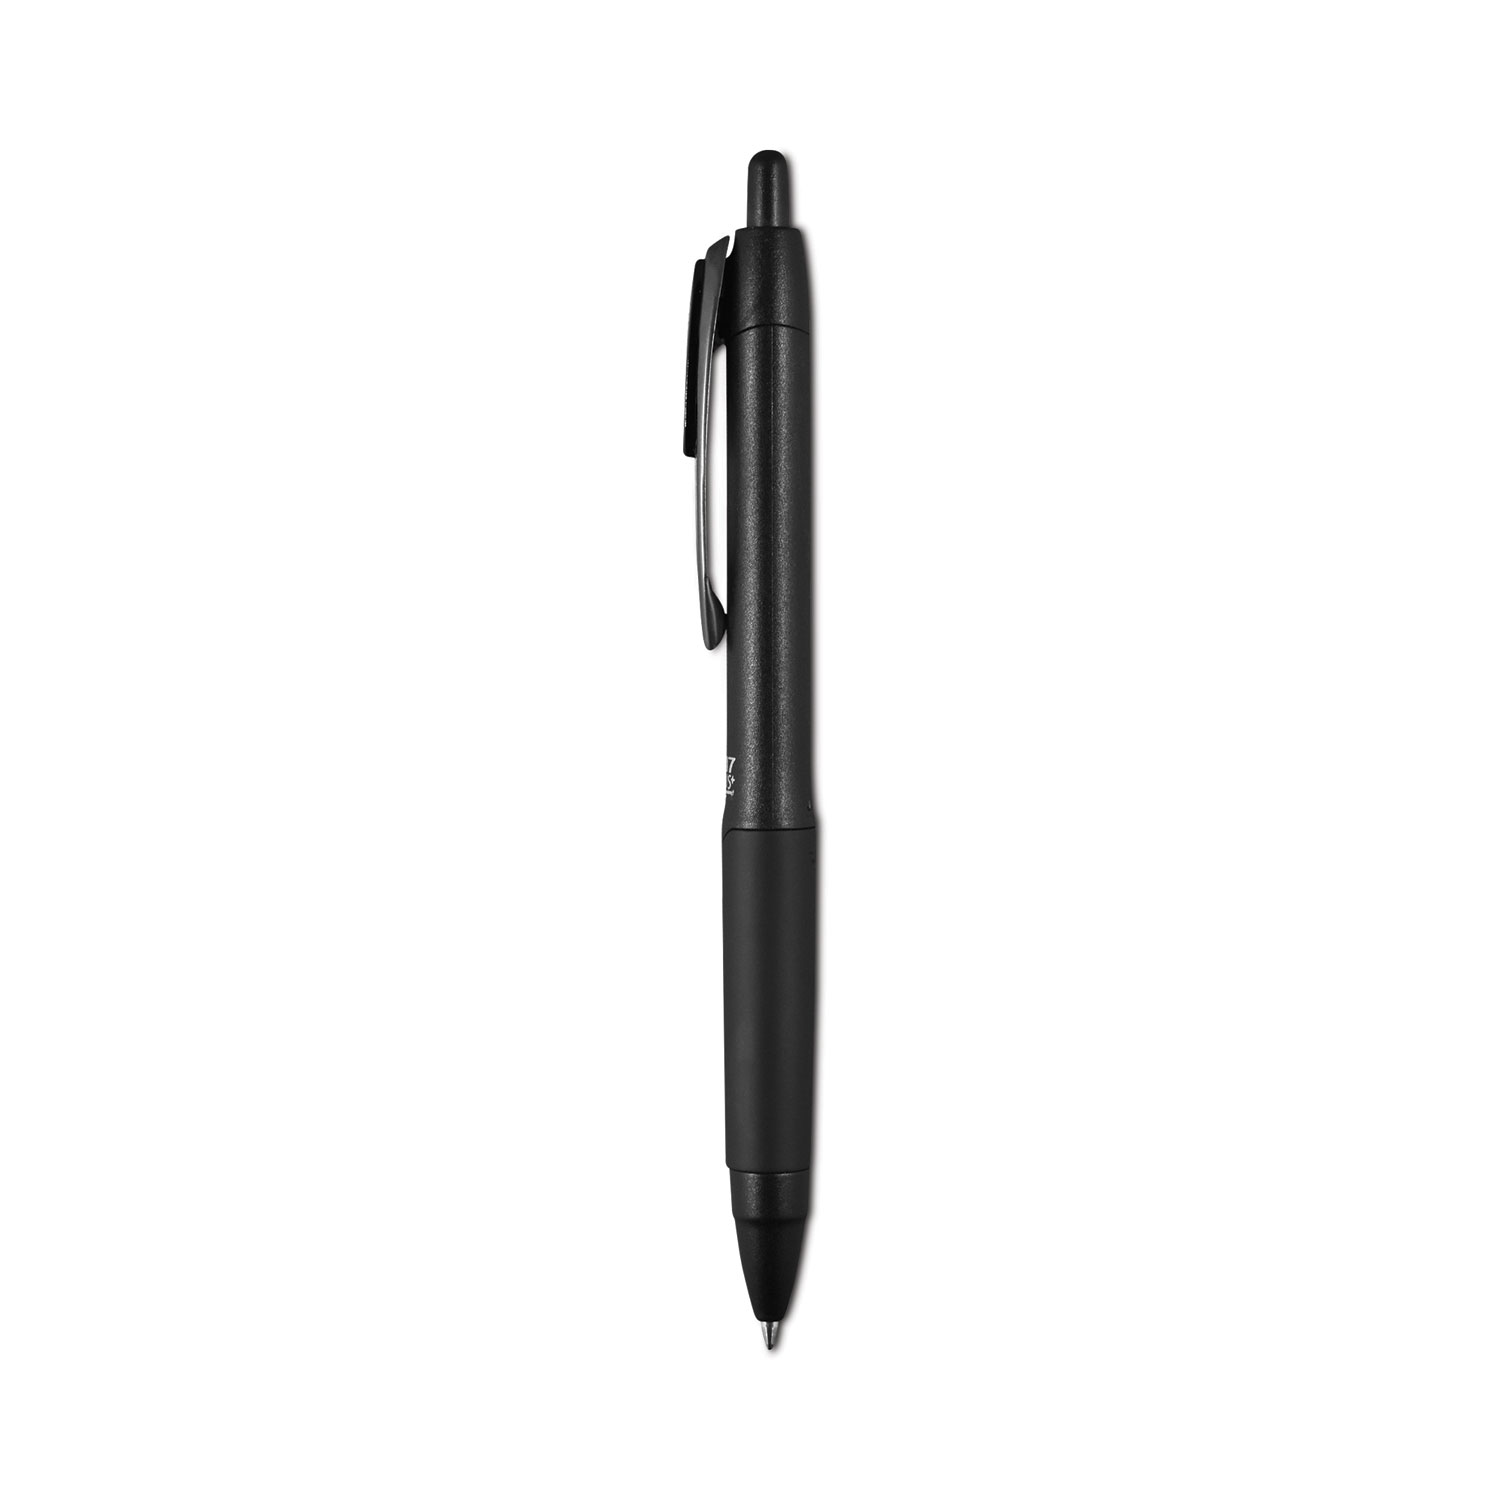 Profile Mechanical Pencils, 0.7 mm, HB (#2), Black Lead, Black Barrel,  36/Pack - BOSS Office and Computer Products